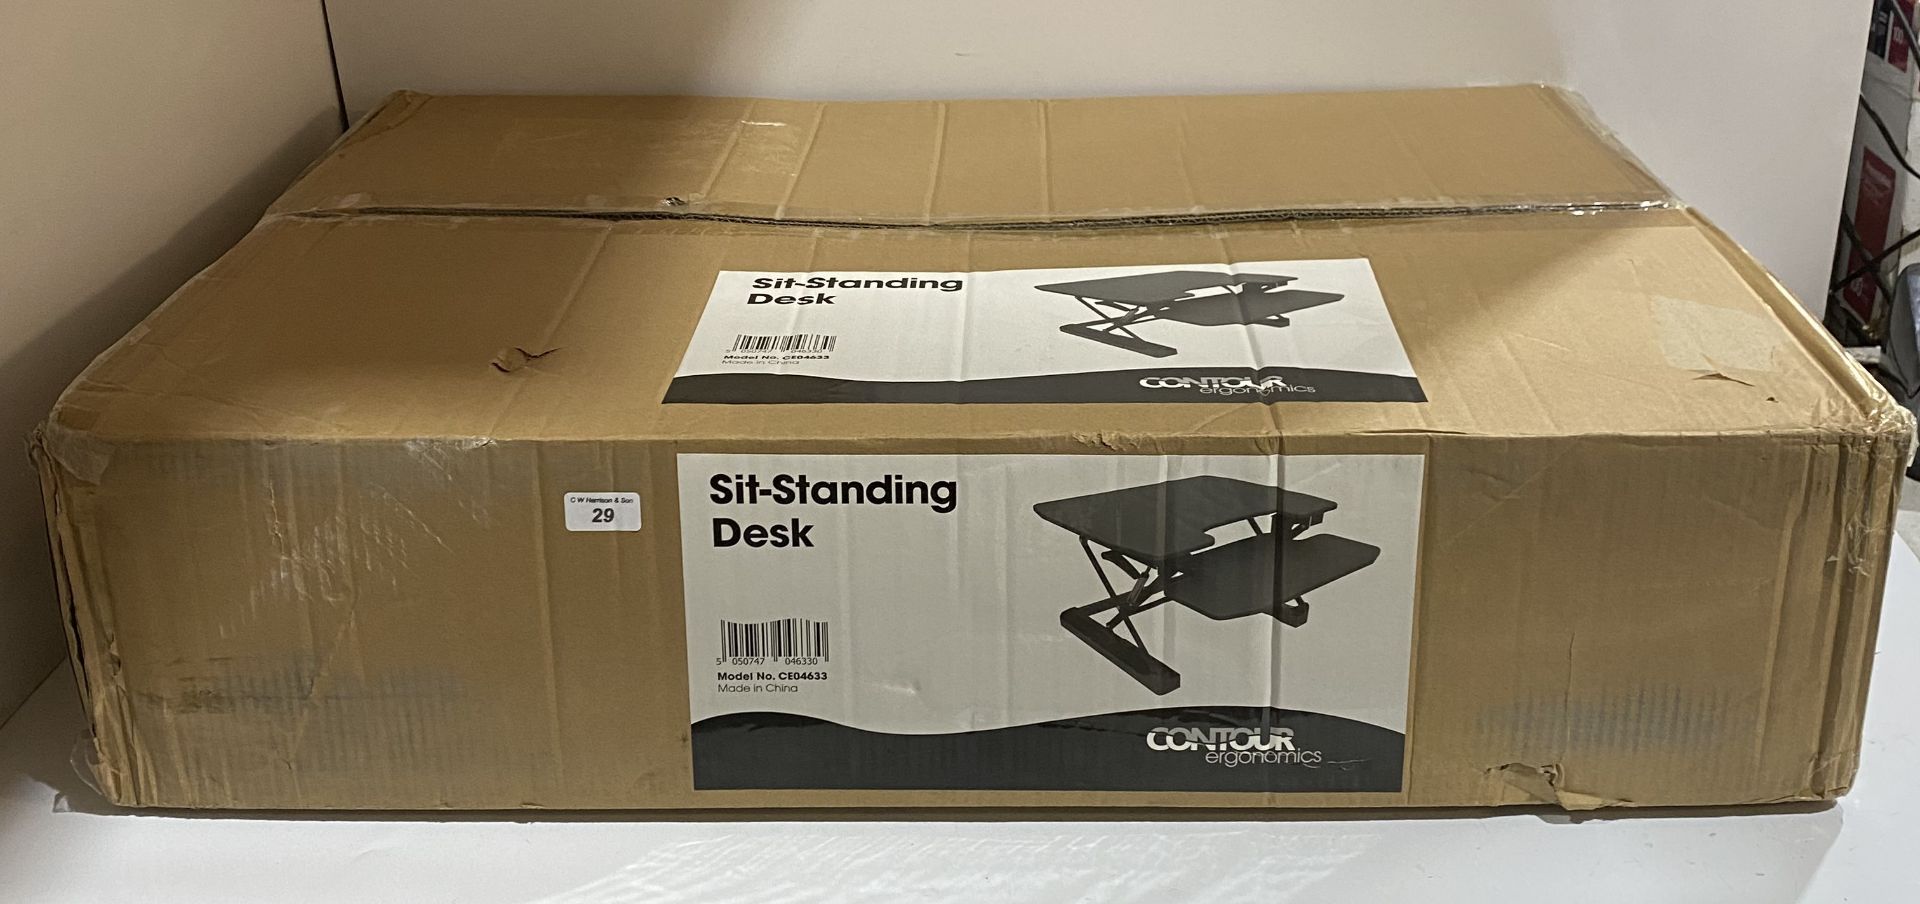 1 x new boxed height adjustable sit - stand desk by Contour Ergonomics (saleroom location: H10)